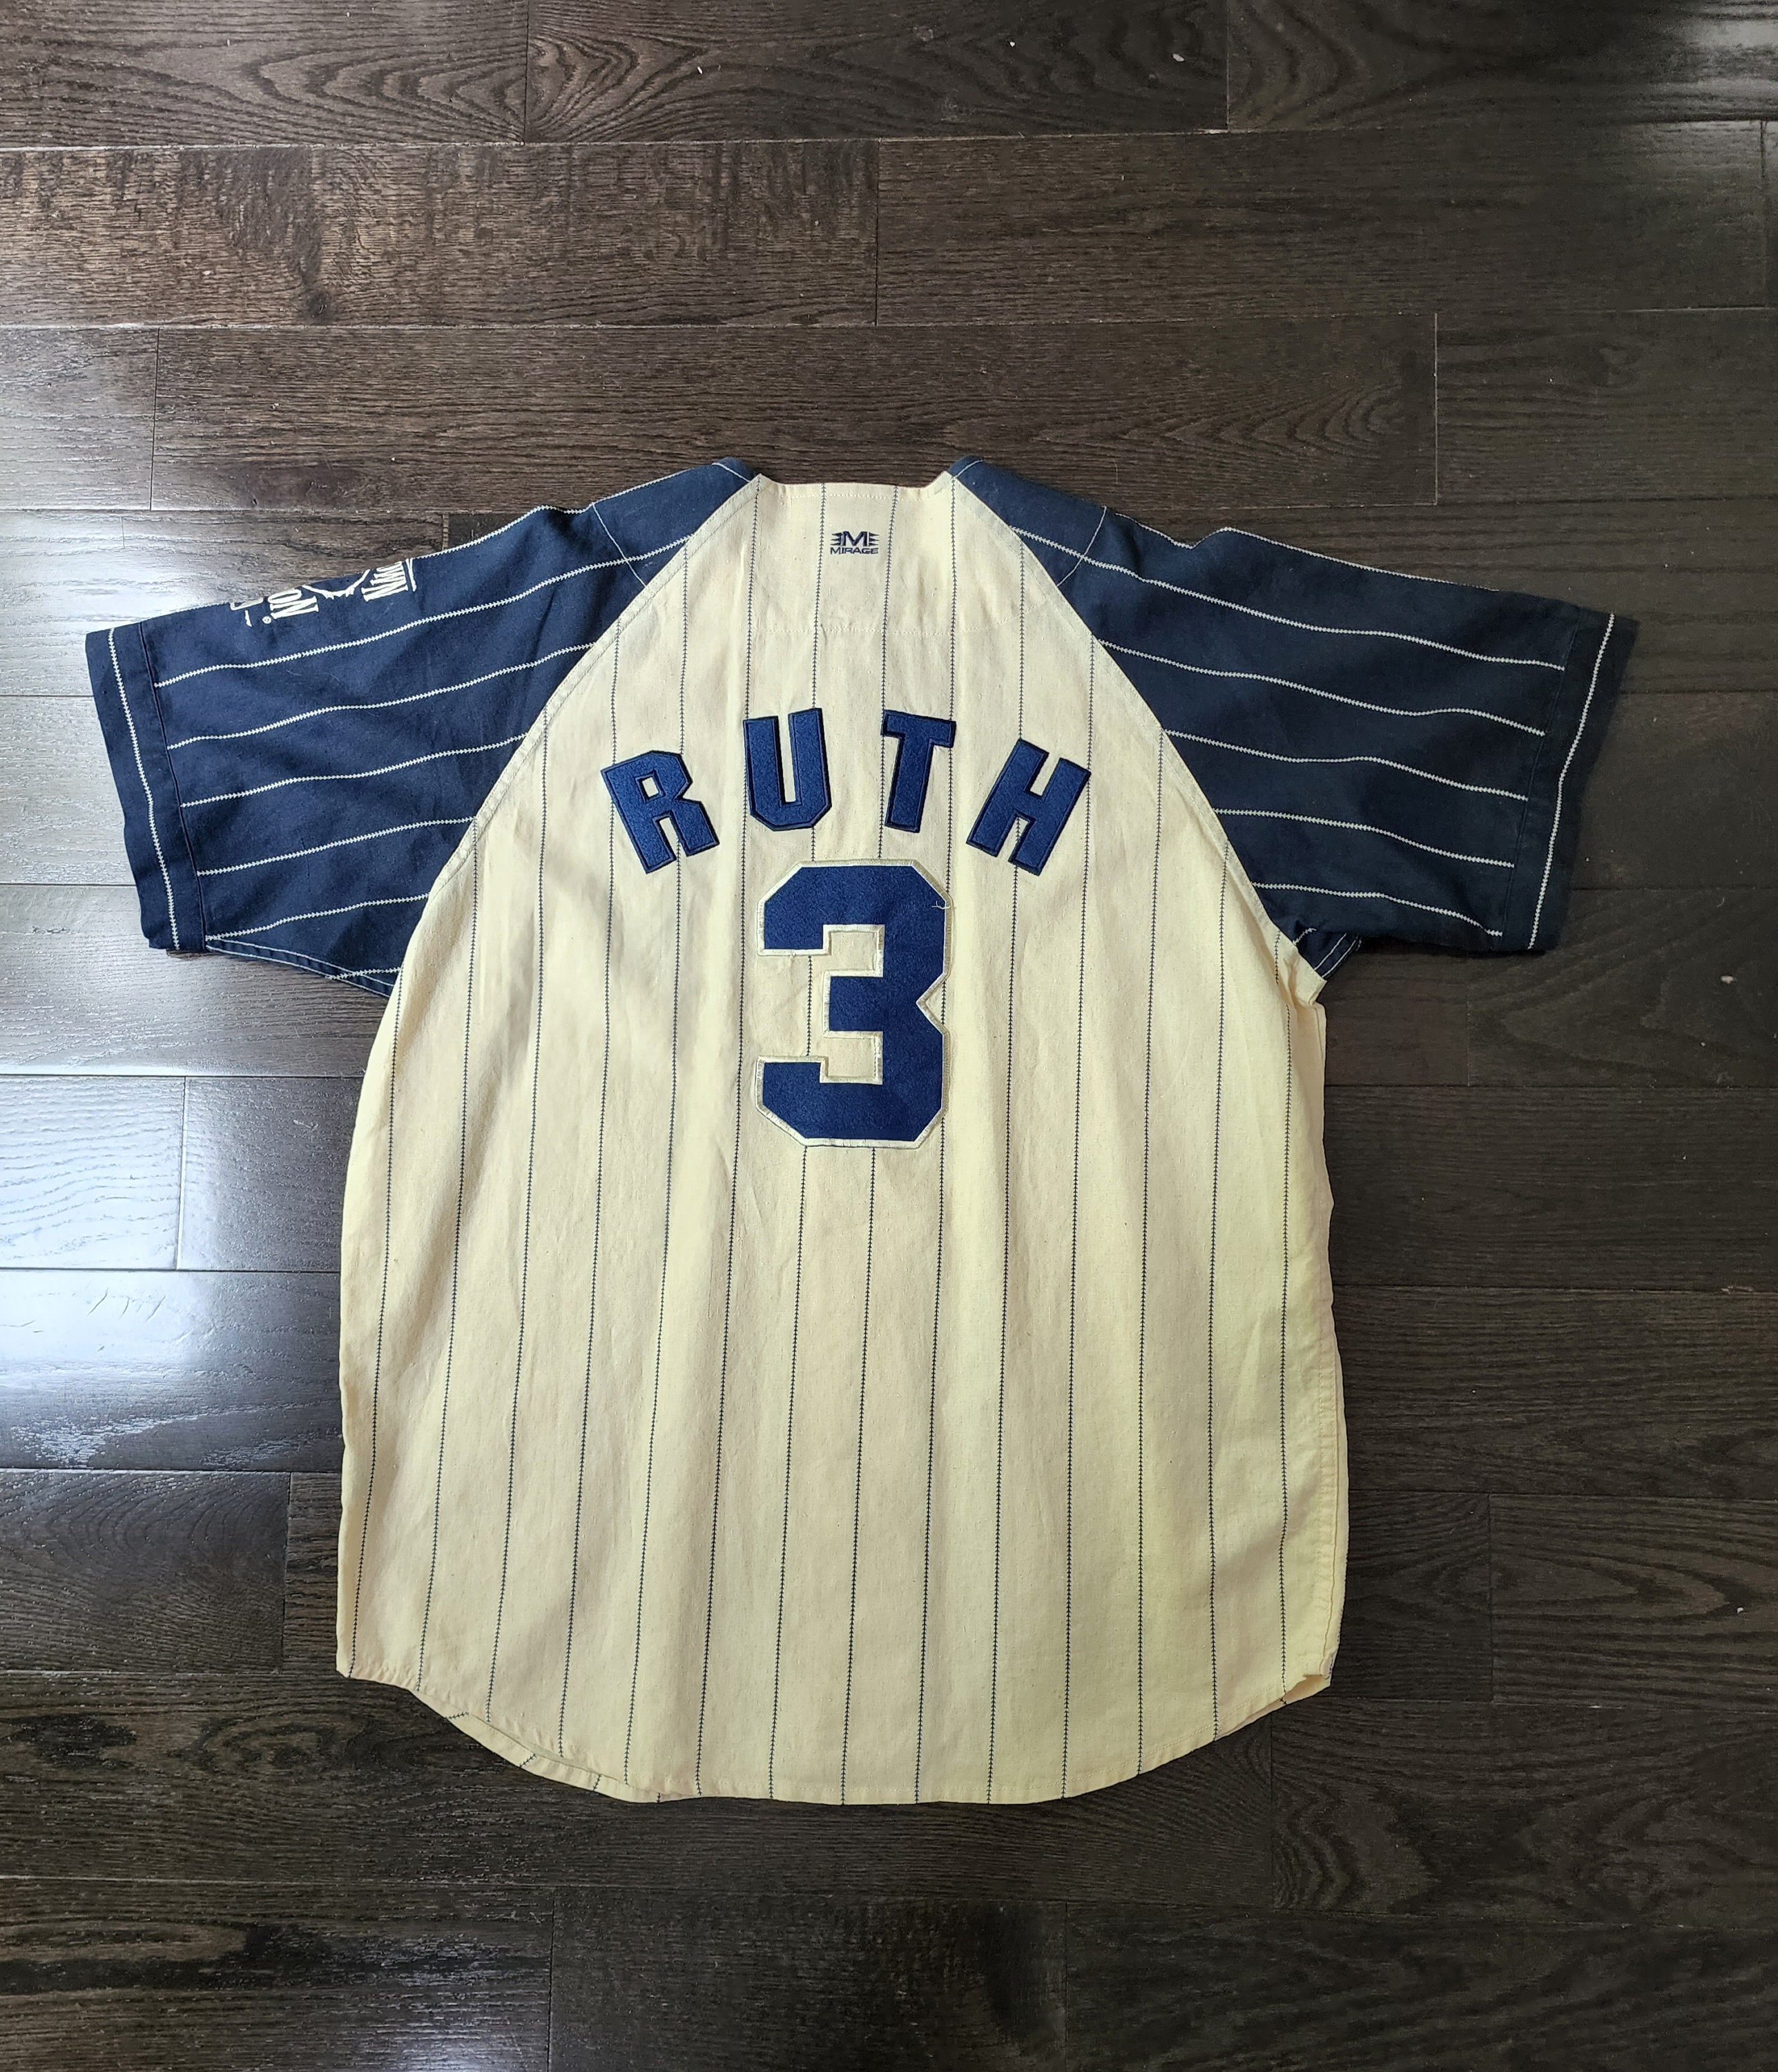 VTG Babe Ruth #3 New York Yankees Mirage Cooperstown Jersey Men's LARGE